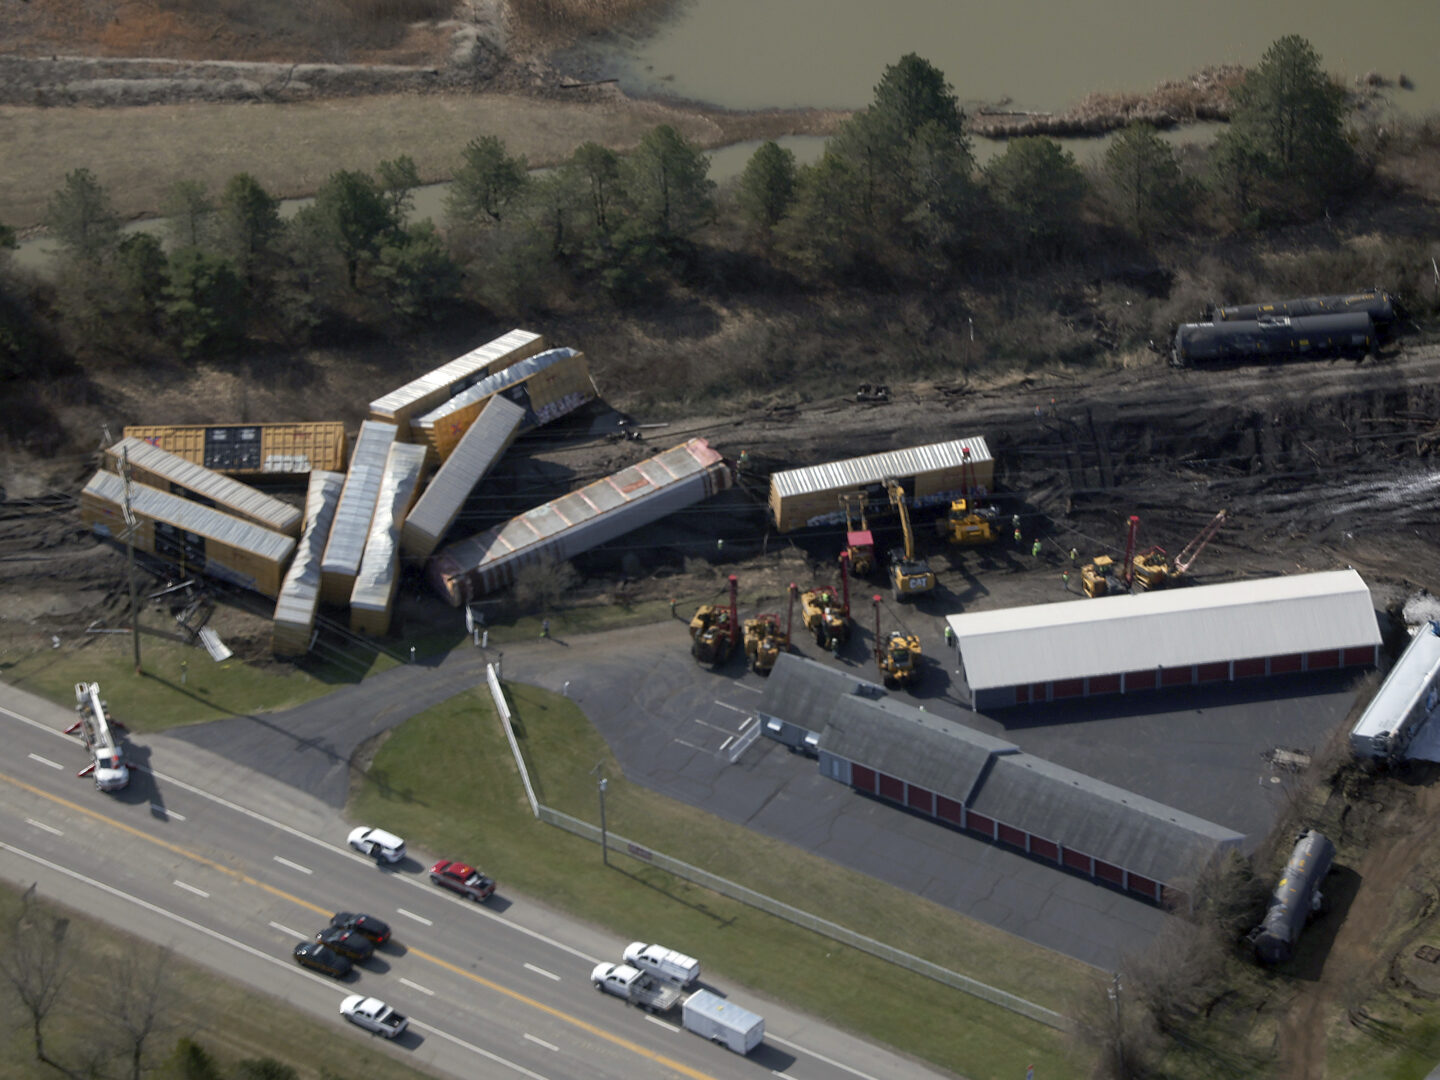 SPRINGFIELD, OH - MARCH 5: Aerial view of a Norfolk Southern Train Derailment leaving 20 cars jumping the tracks on the previous day In Springfield, Ohio. March 5, 2023. Credit: mpi34/MediaPunch /IPX